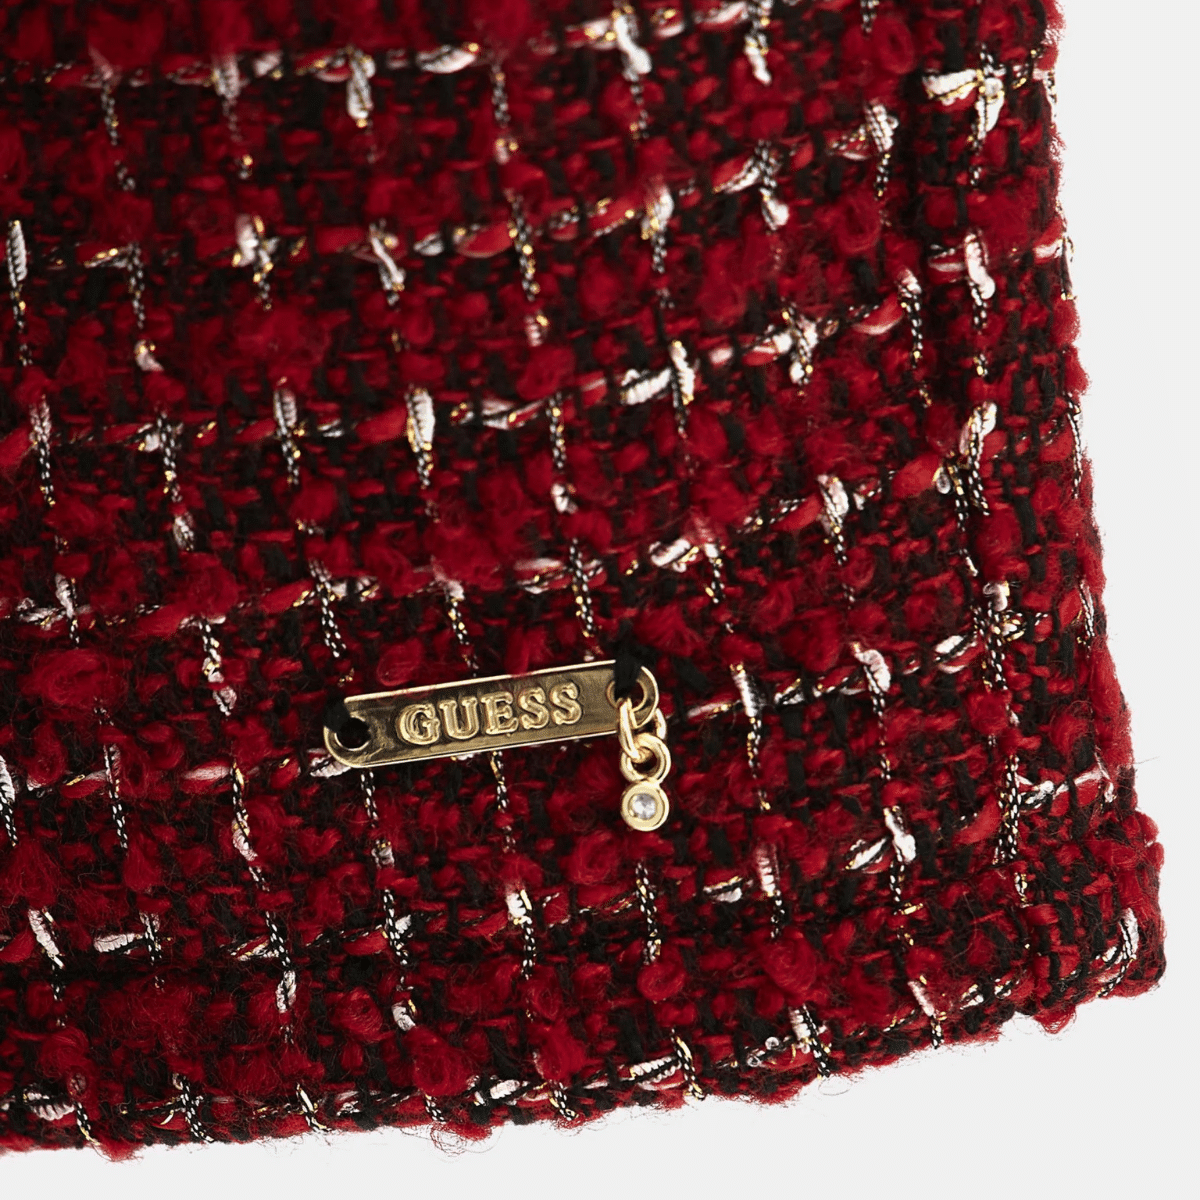 Guess girls red winter shorts close up of logo